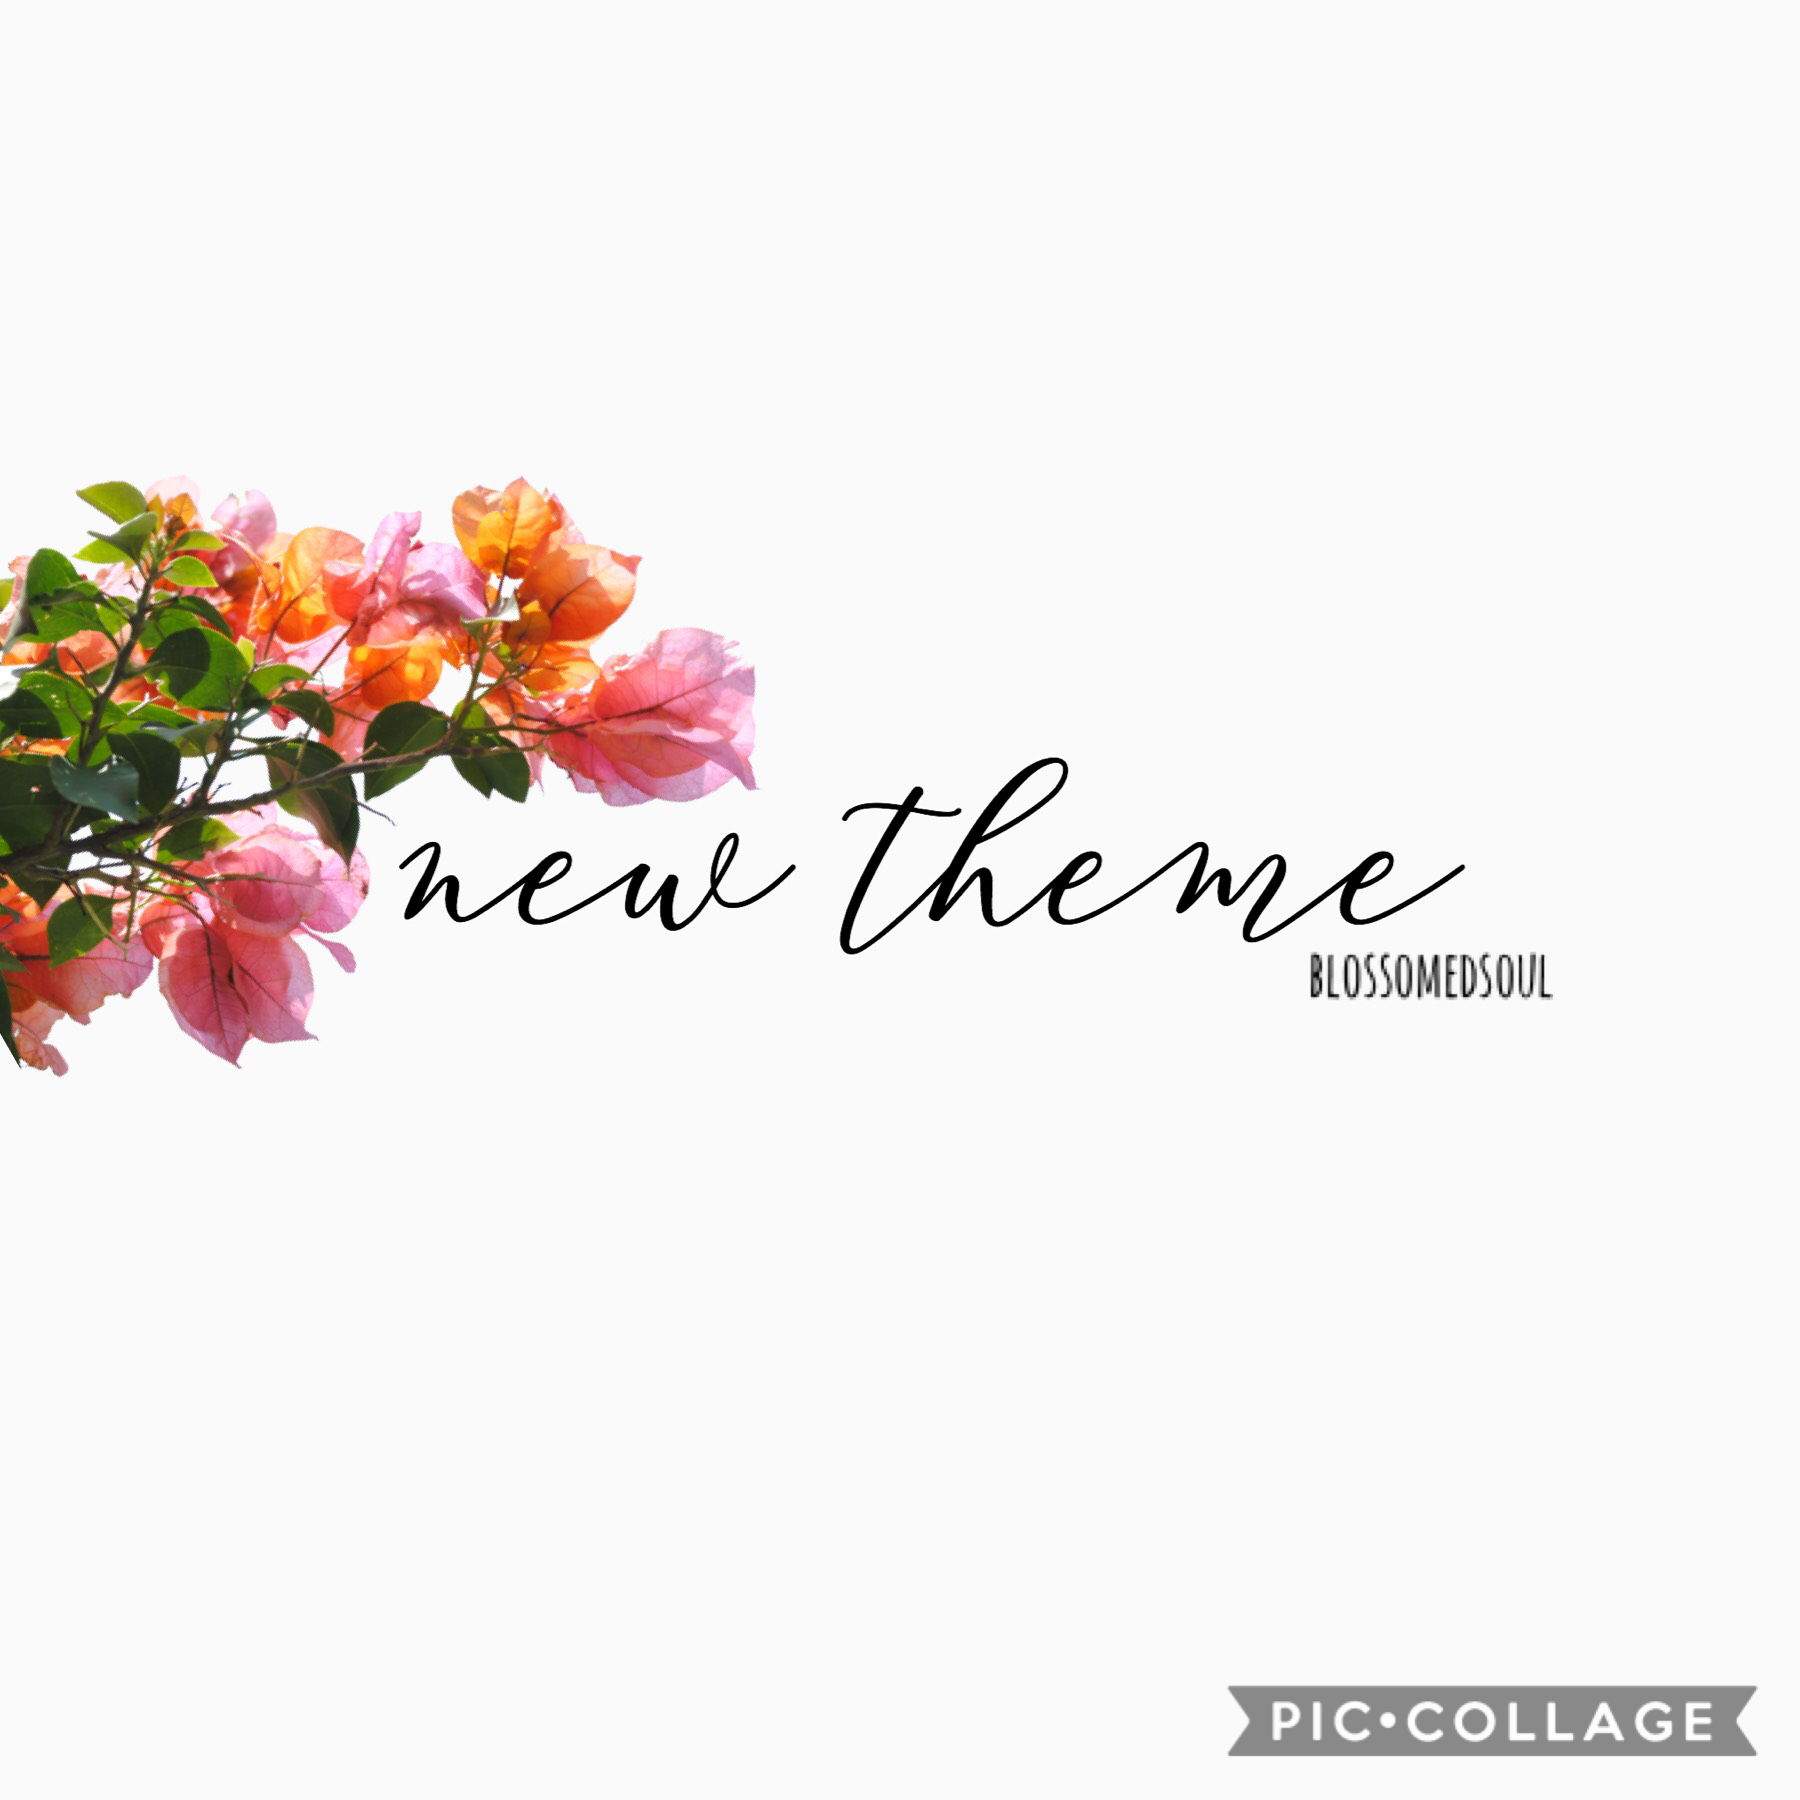 t a p

new theme! i got a little tired of the minimalist one so i’m trying something new ♥️✨🌿